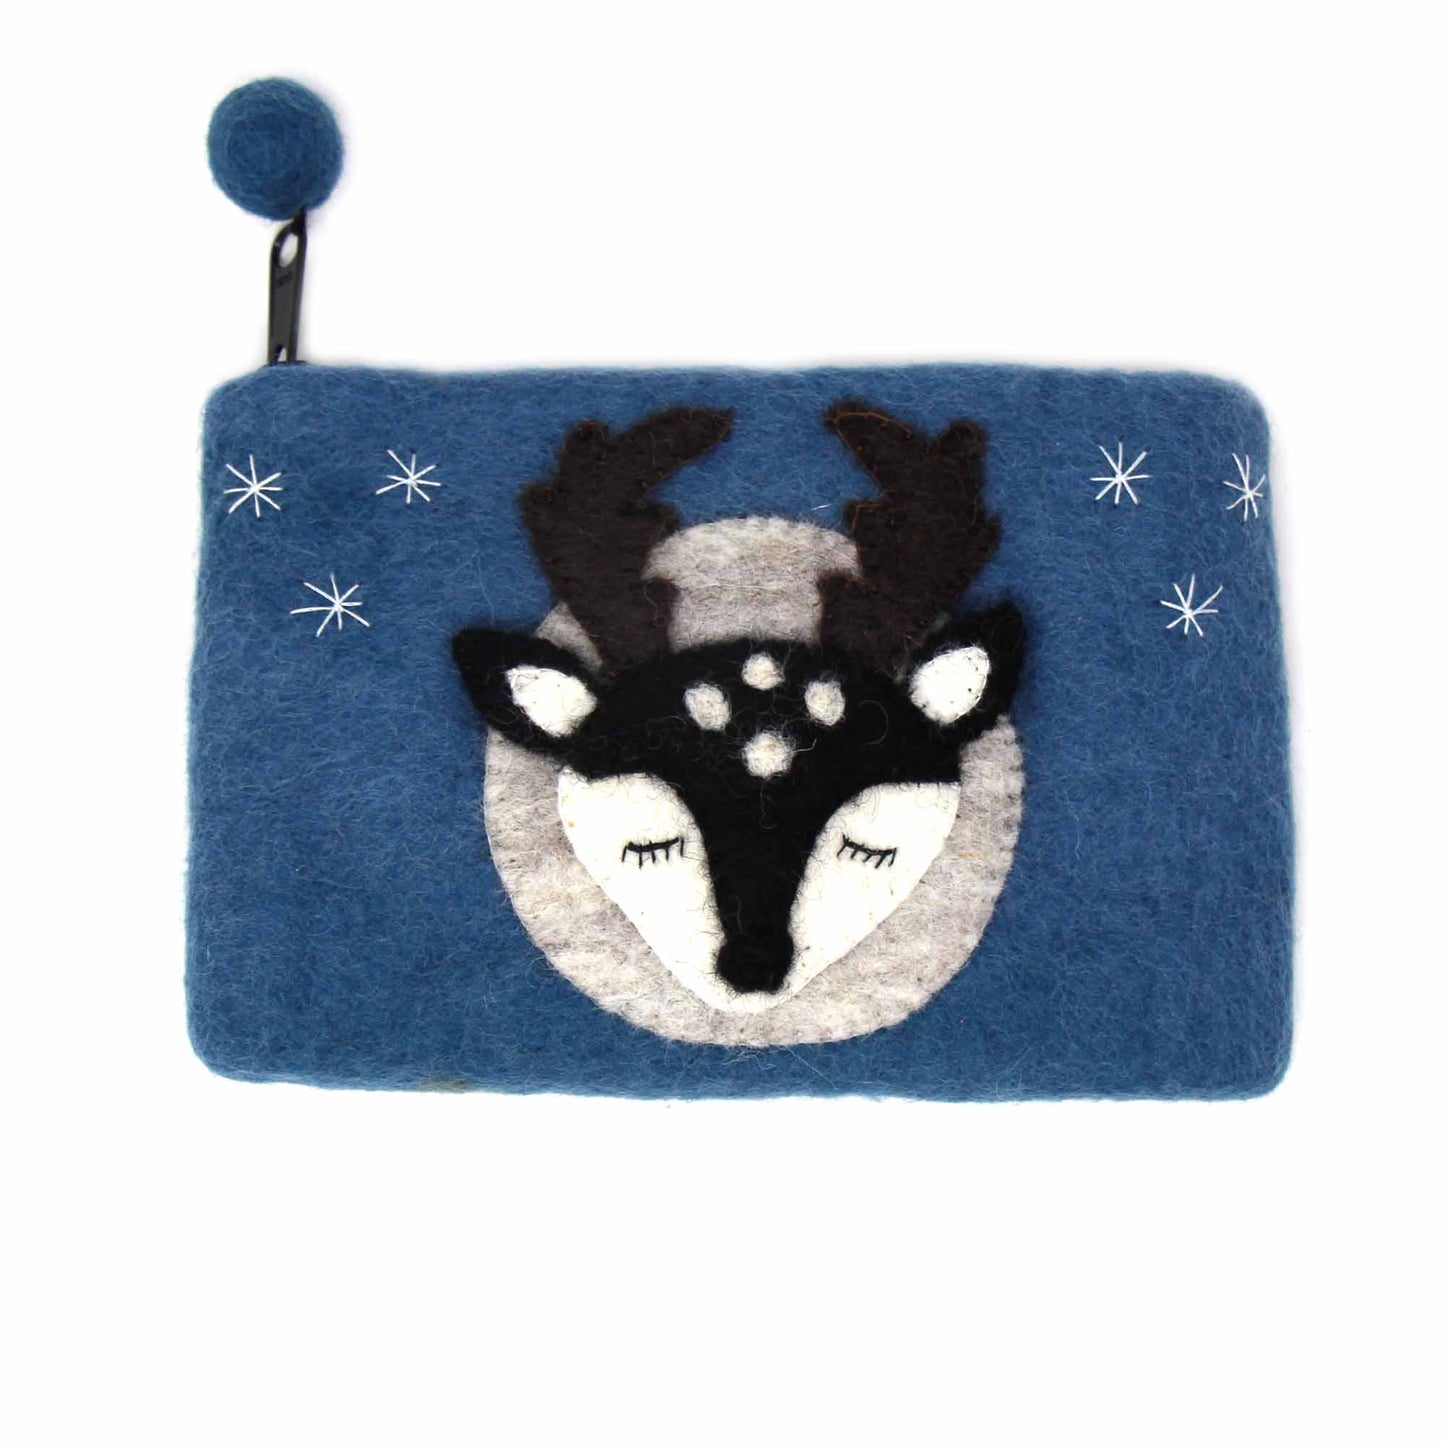 Hand Crafted Felt: Stag Pouch - Linda Kay Gifford’s - Those Nasty Women TALK! by SWEETSurvivor